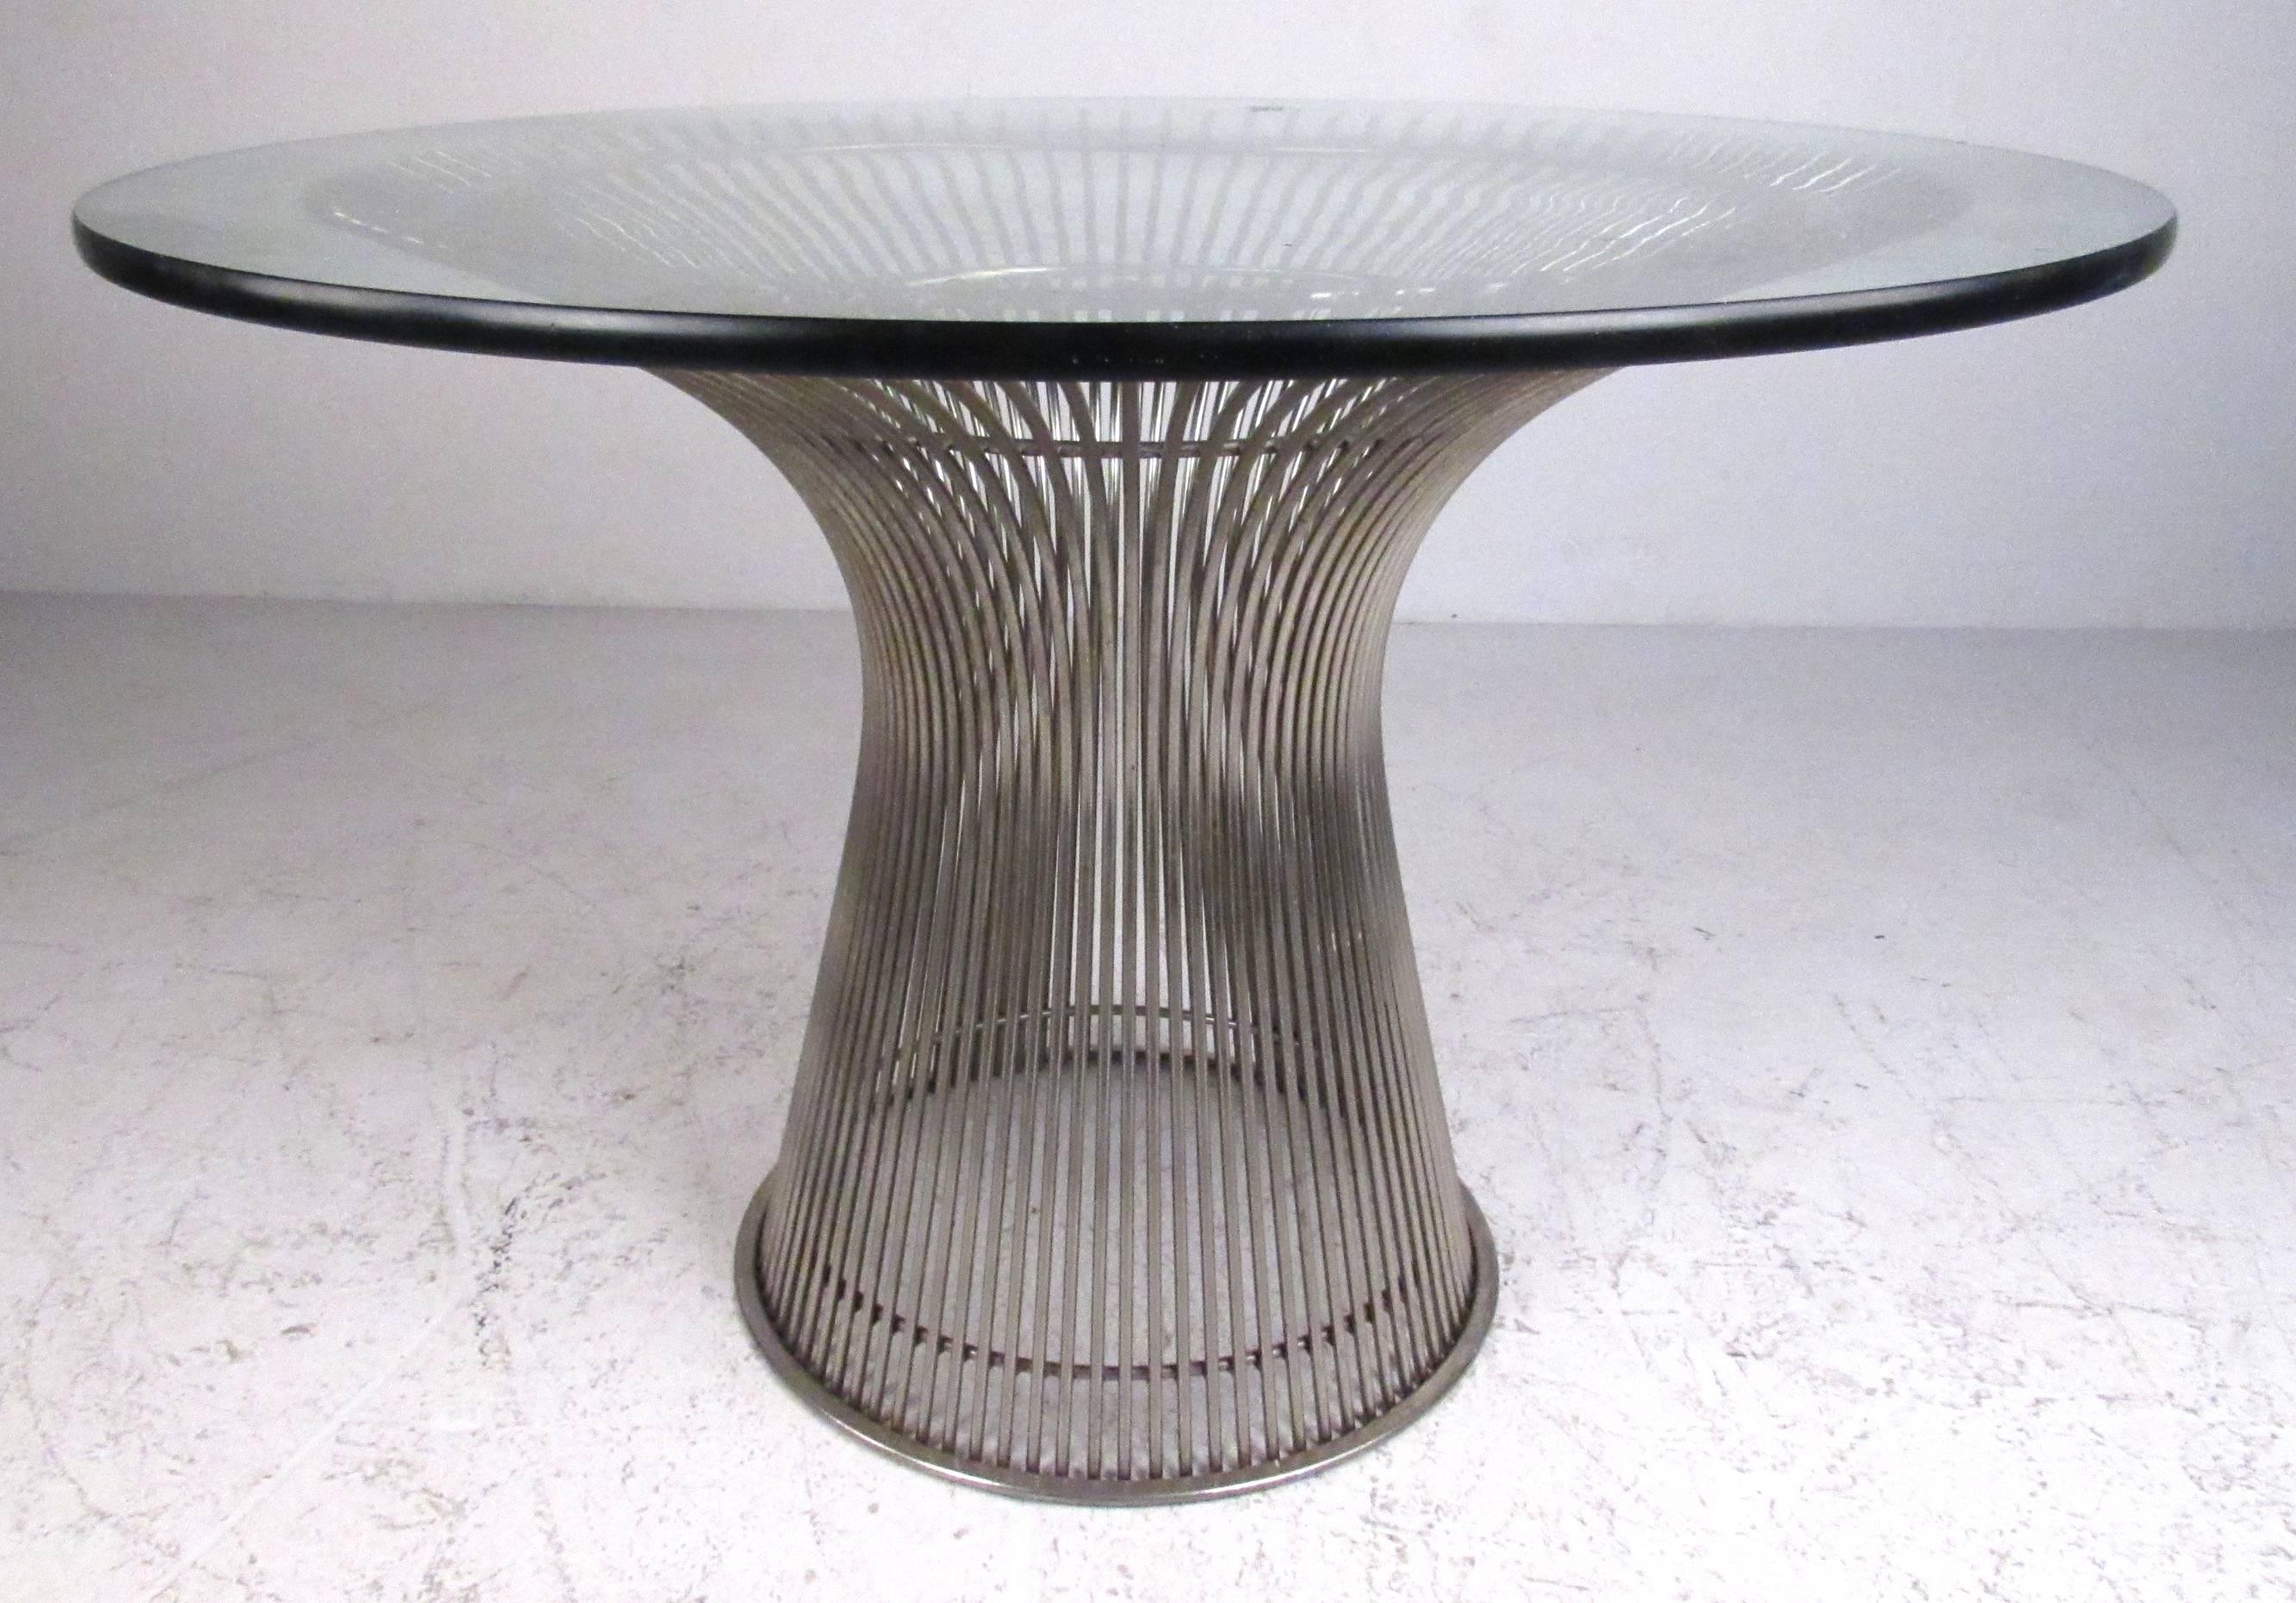 Graceful, elegant steel rod table with nickel finish designed by Warren Platner for Knoll, circa 1960s. Please confirm item location (NY or NJ) with dealer.